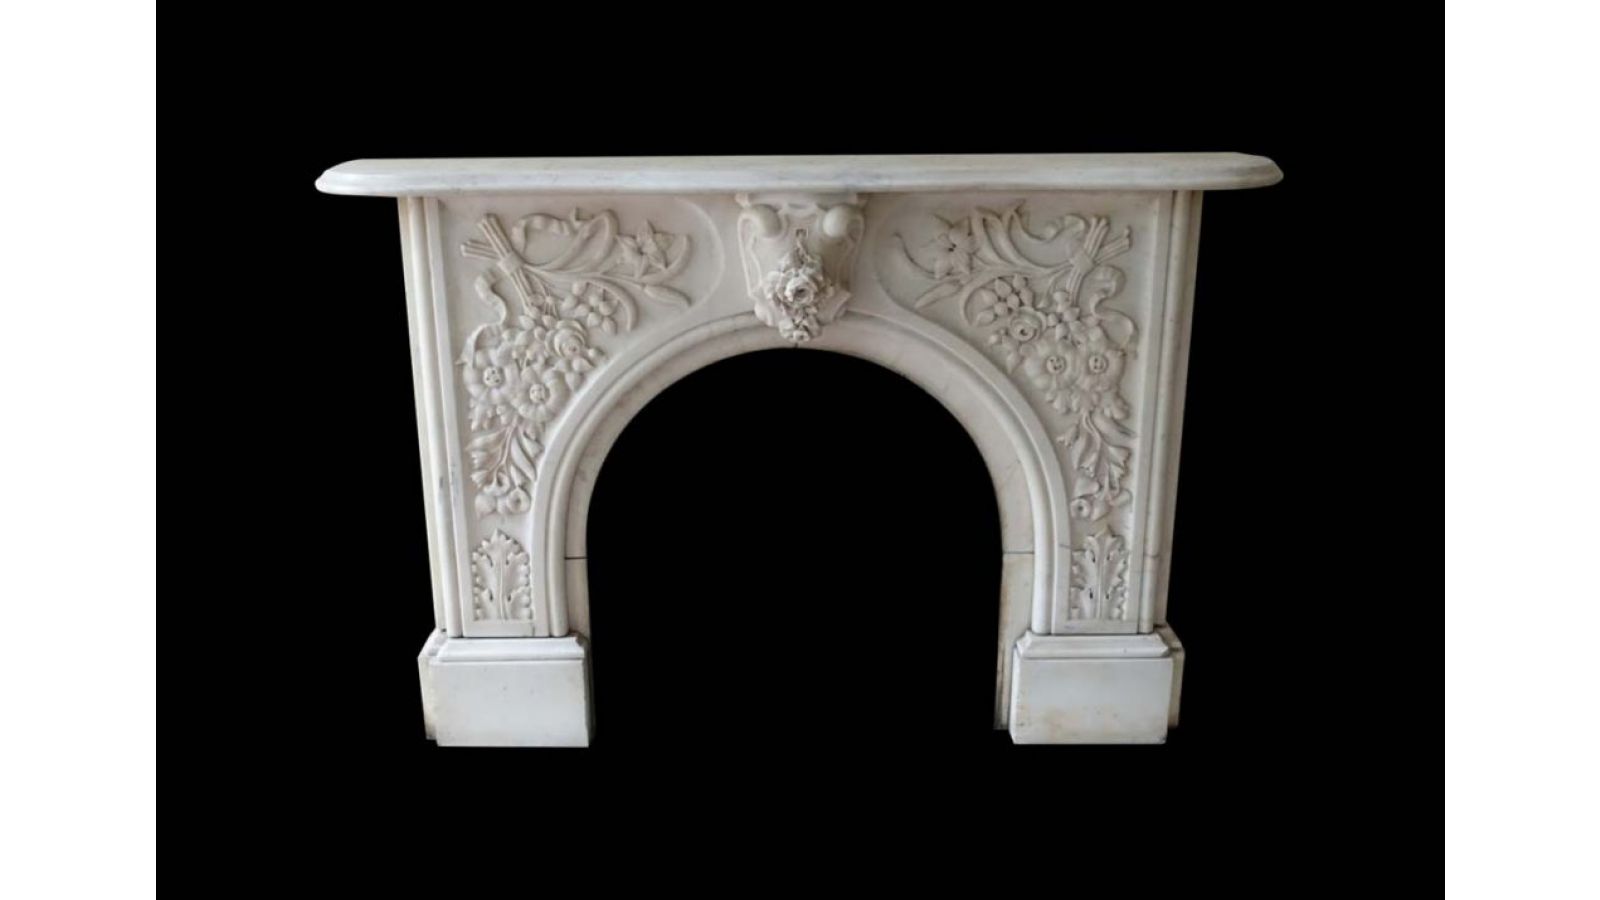 1853 Arched Statuary White Marble Mantel with Summer Screen